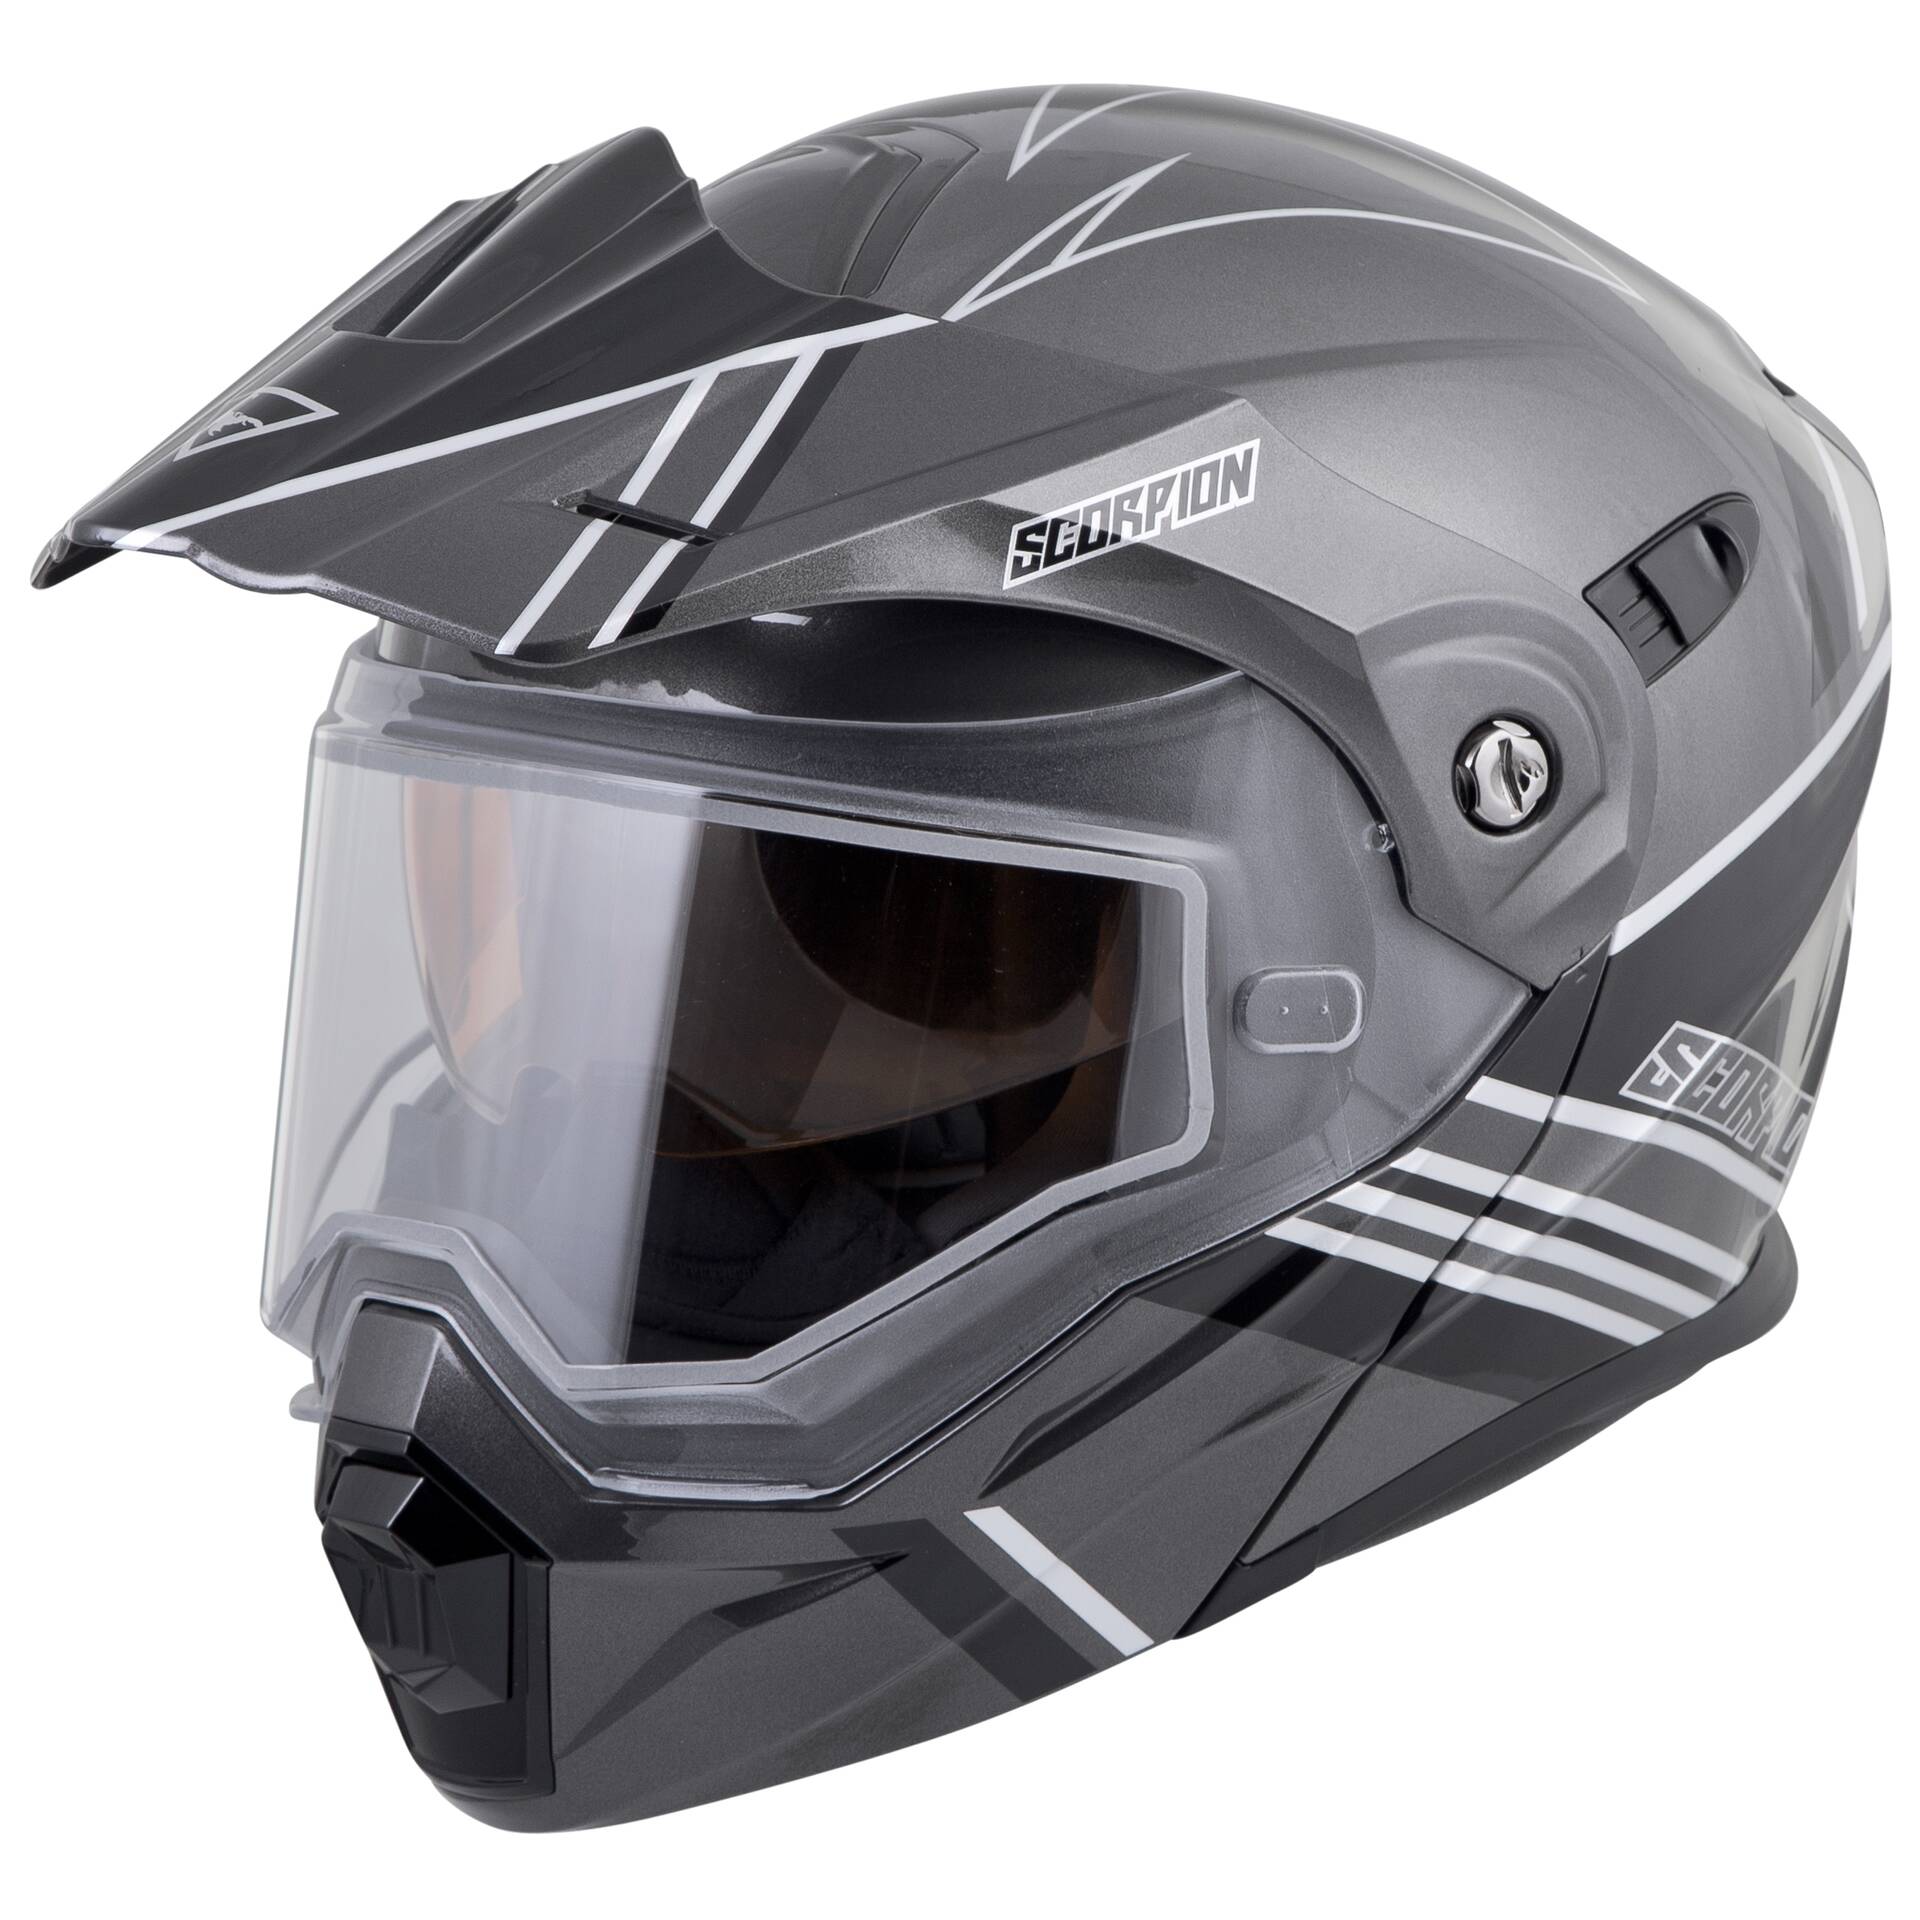 Large HJC DS-X1 Tactic Adult Snowmobile Helmet with Electric Shield MC-3HSF 